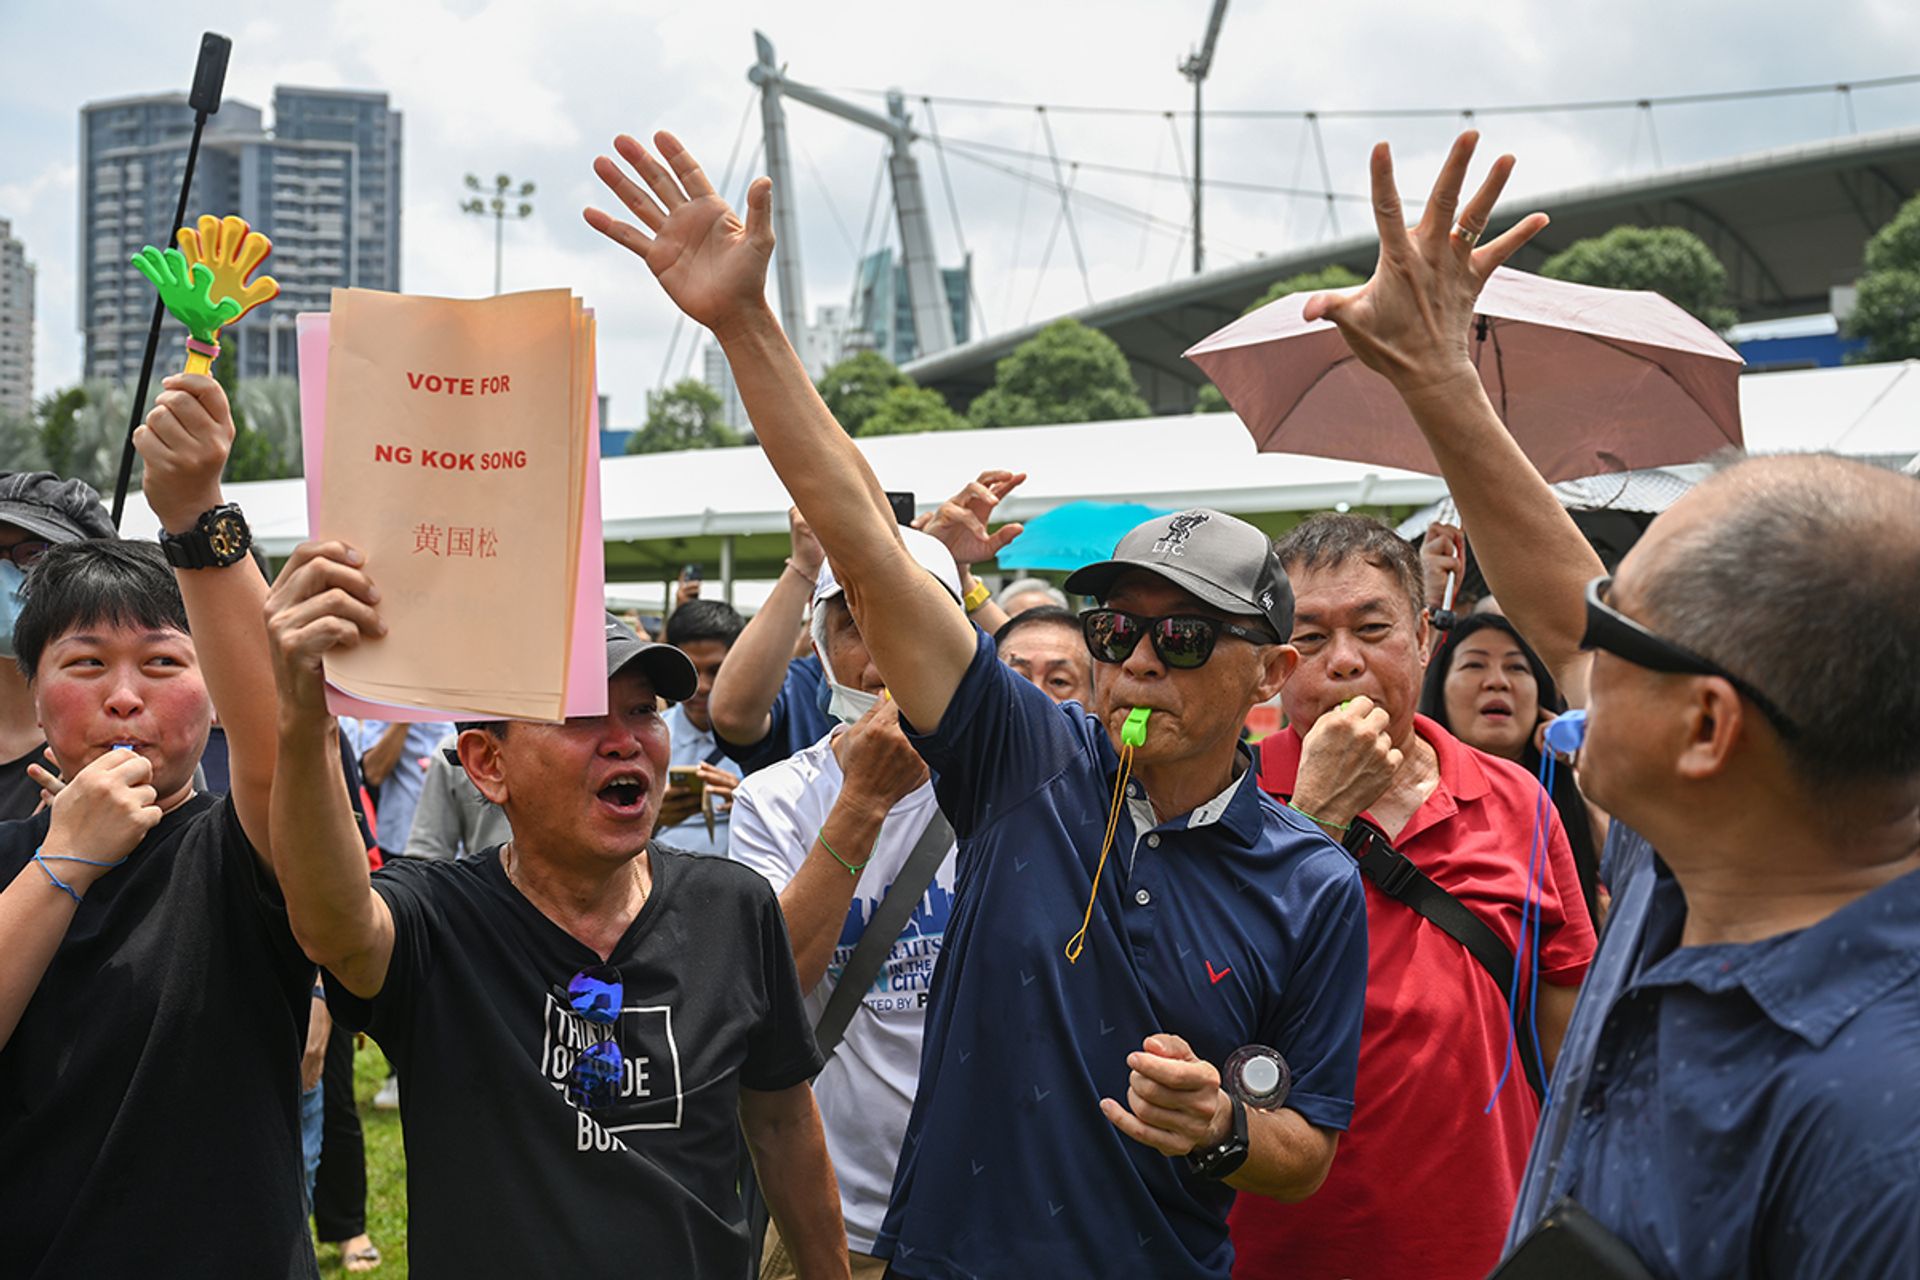 Presidential candidate Ng Kok Song’s supporters cheering as he makes a speech on Nomination Day at the nomination centre at the People’s Association headquarters in Jalan Besar on Aug 22, 2023. ST PHOTO: SHINTARO TAY